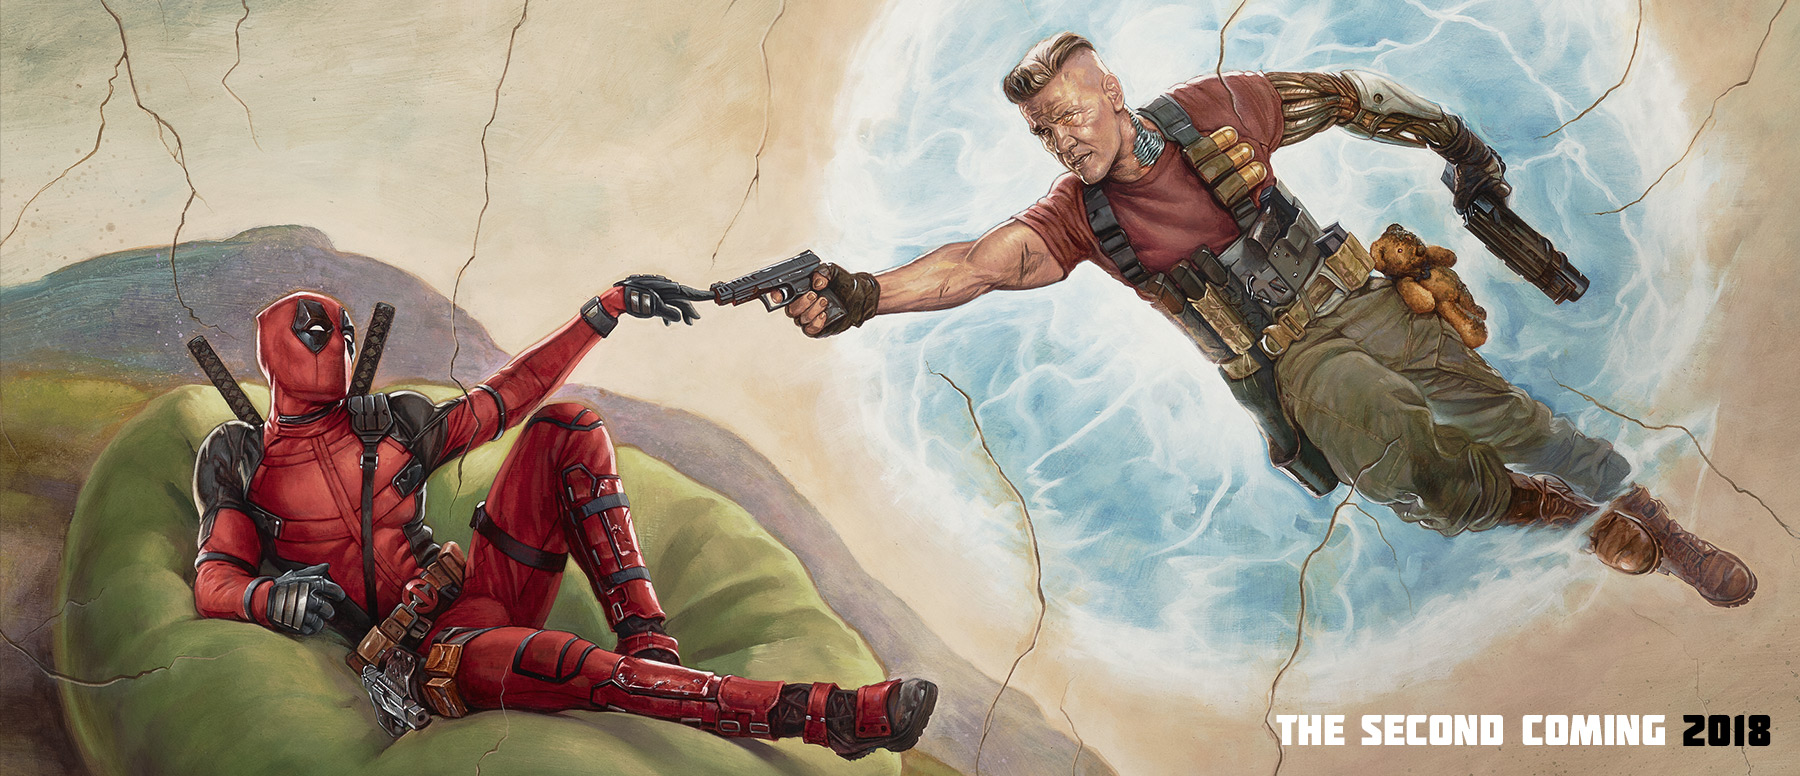 Image of Deadpool Promotional Poster showing Deadpool and Cable imitating Michelangelo's "The Creation of David"